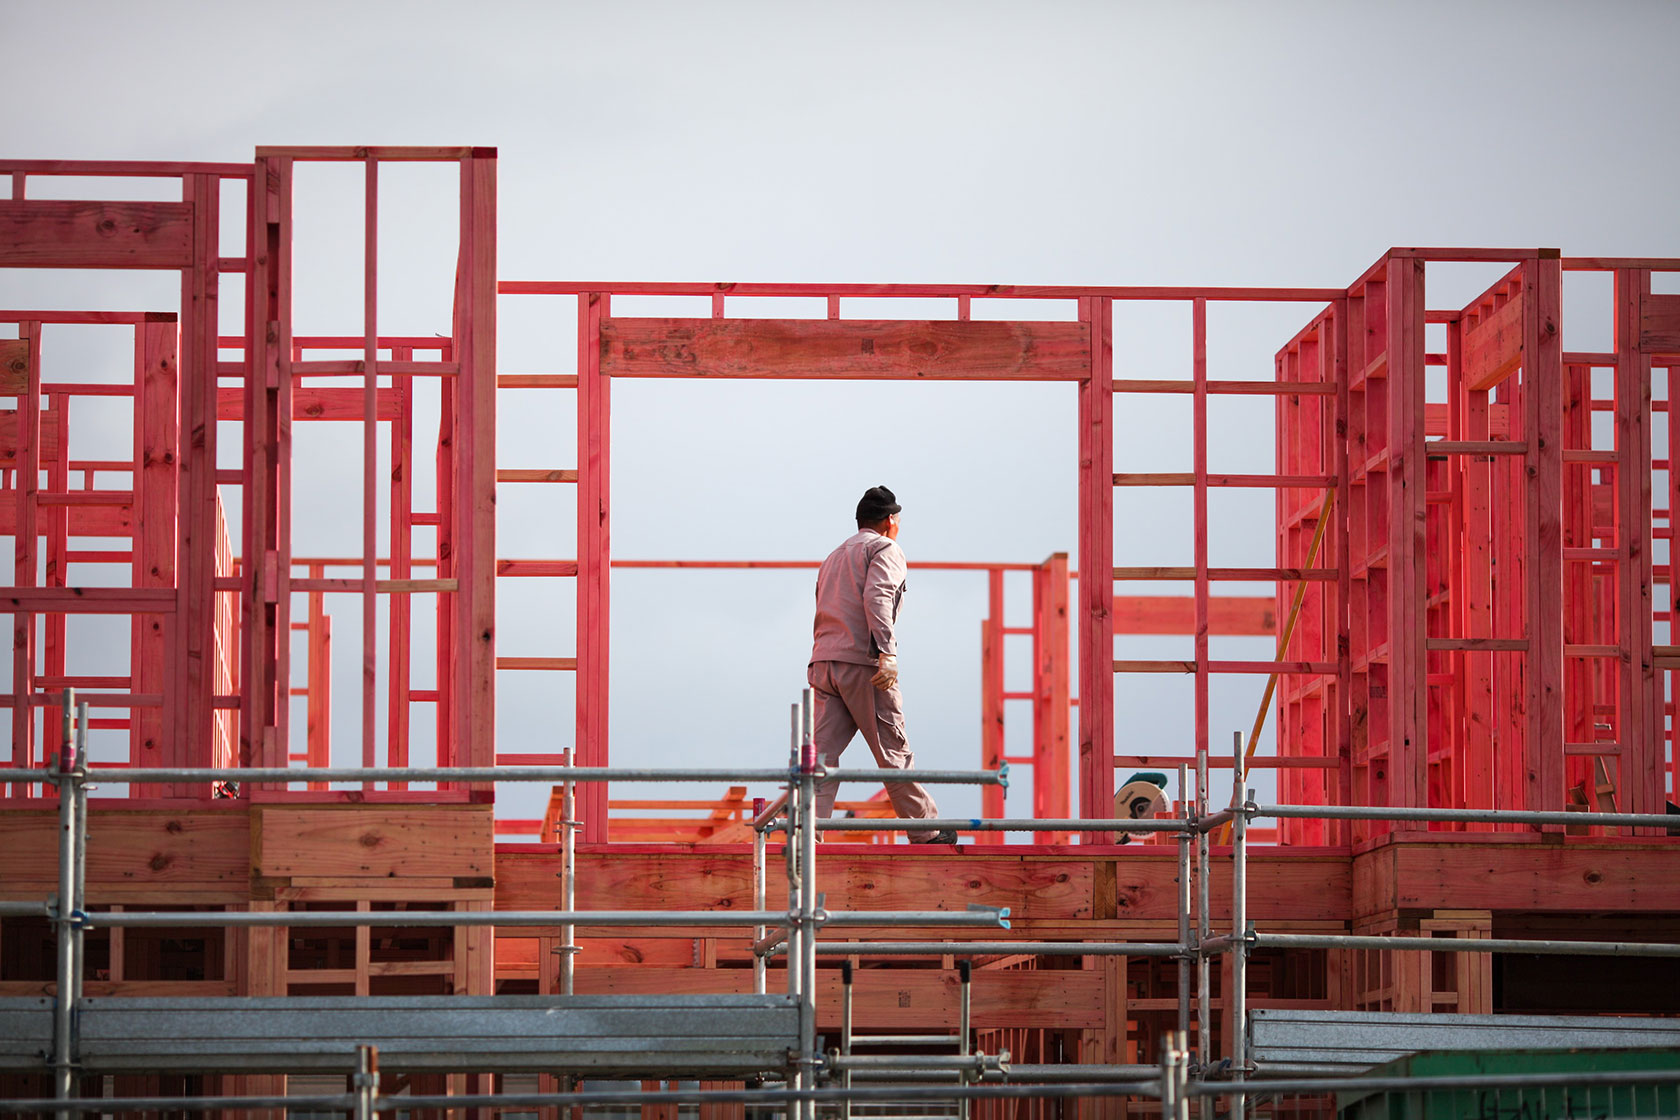 Photo shows a man walking across a partially constructed wooden structure.